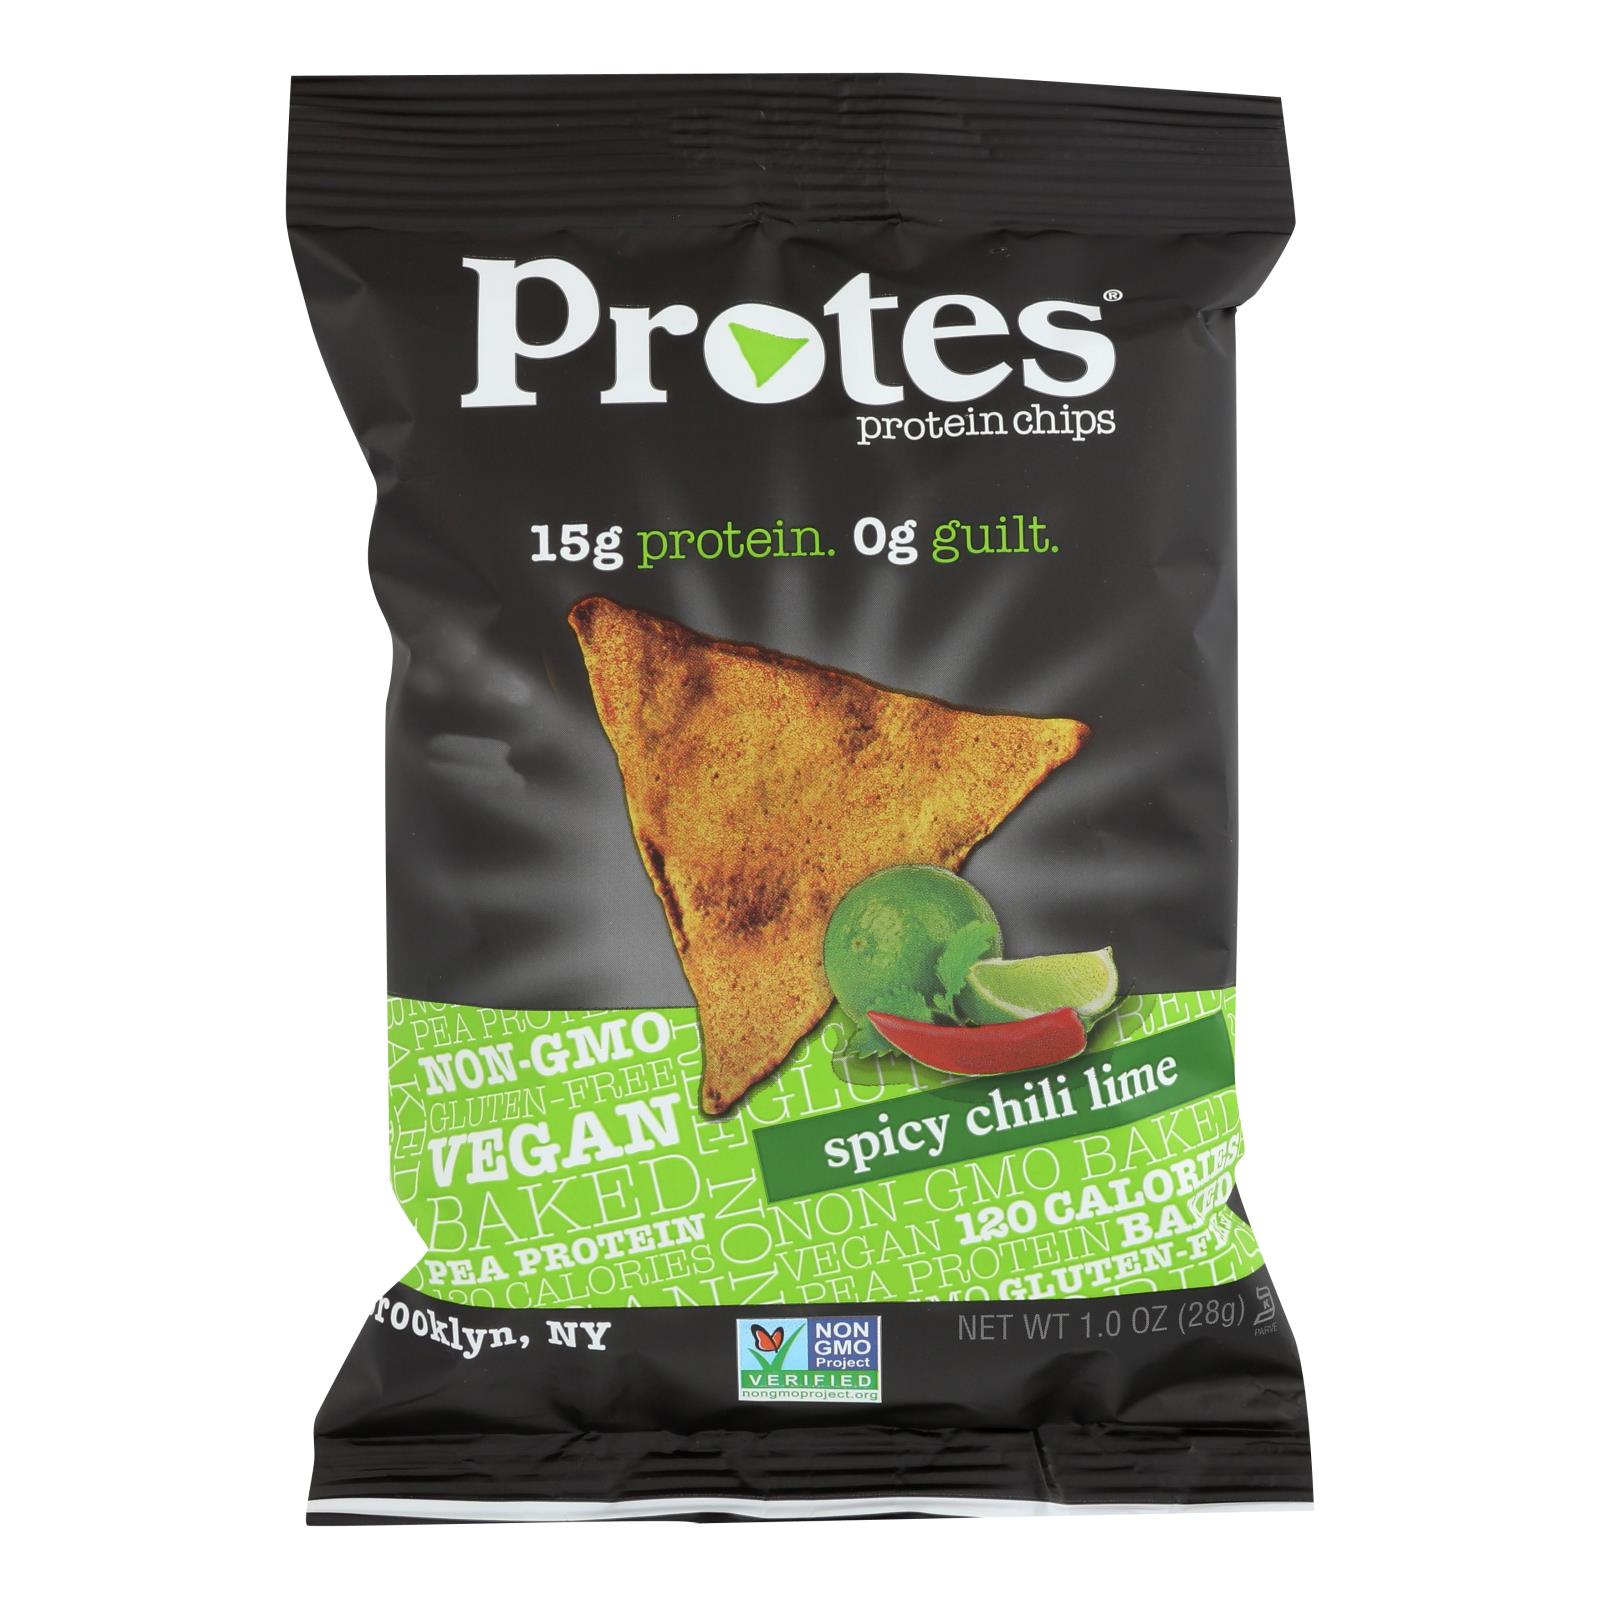 Protes Protein Chips Protein Chips - Case of 24 - 1 OZ